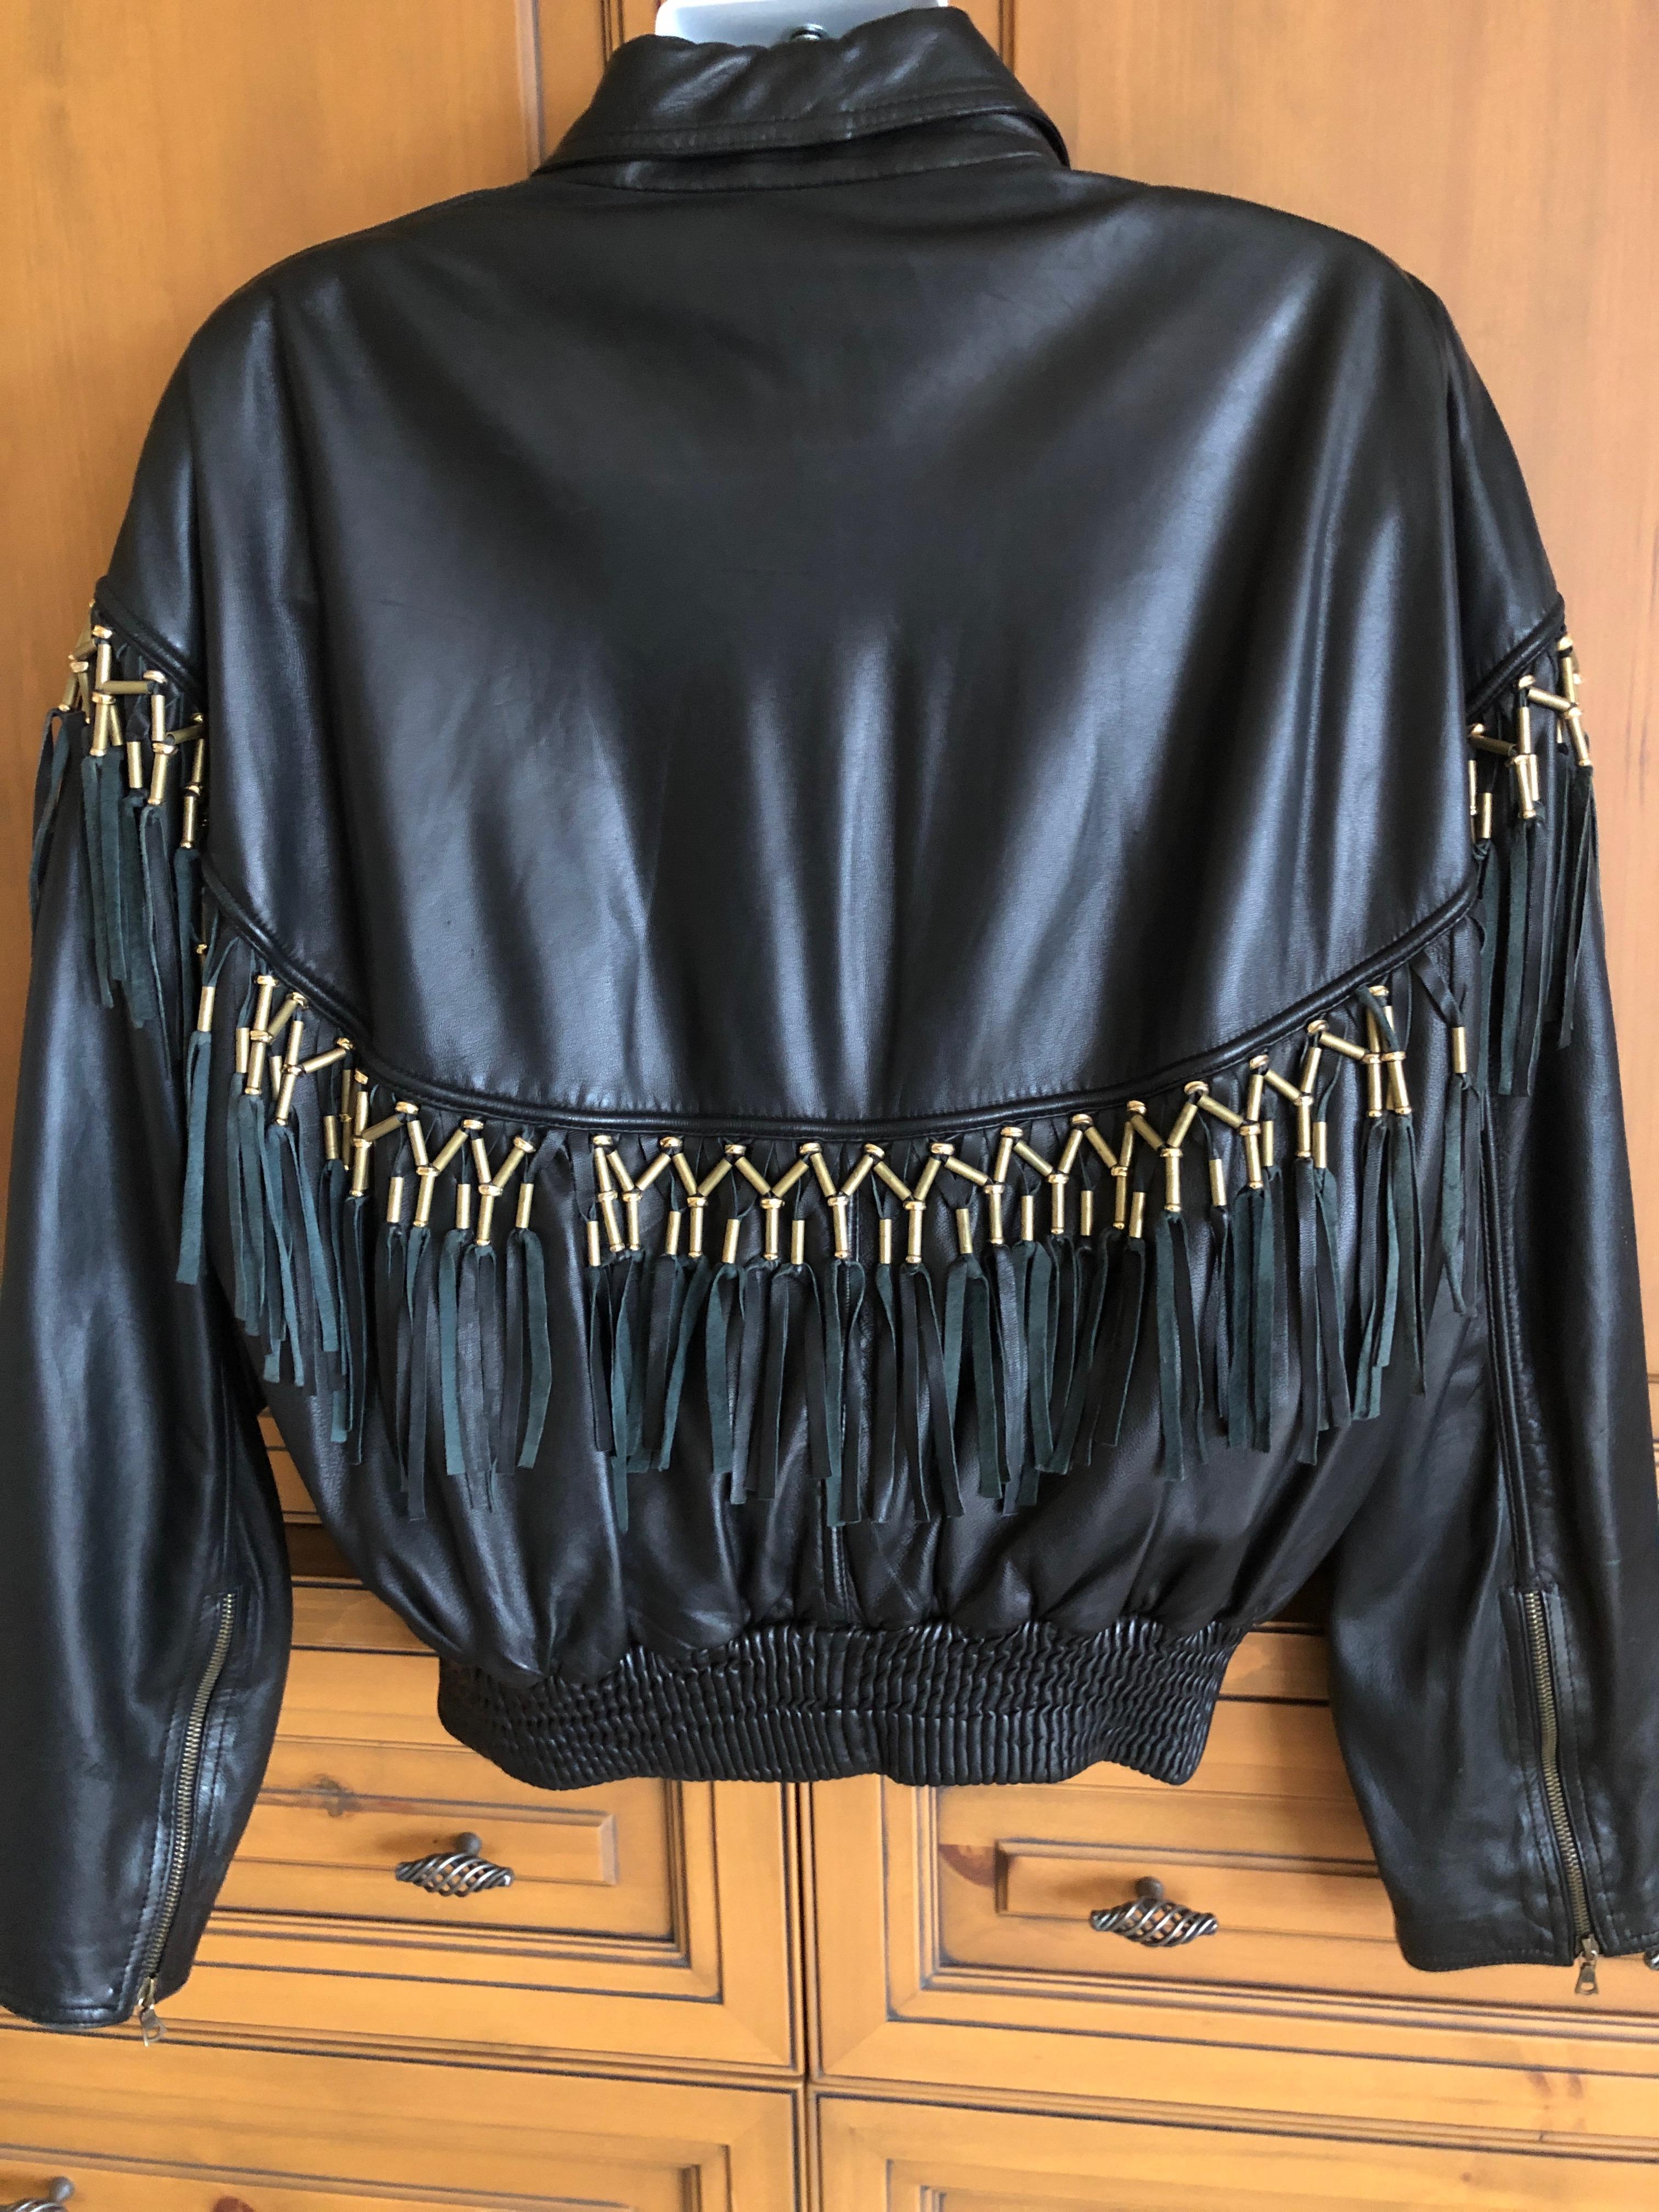 Gianni Versace 1984 Lambskin Leather Men's Jacket with Beaded Fringe For Sale 5